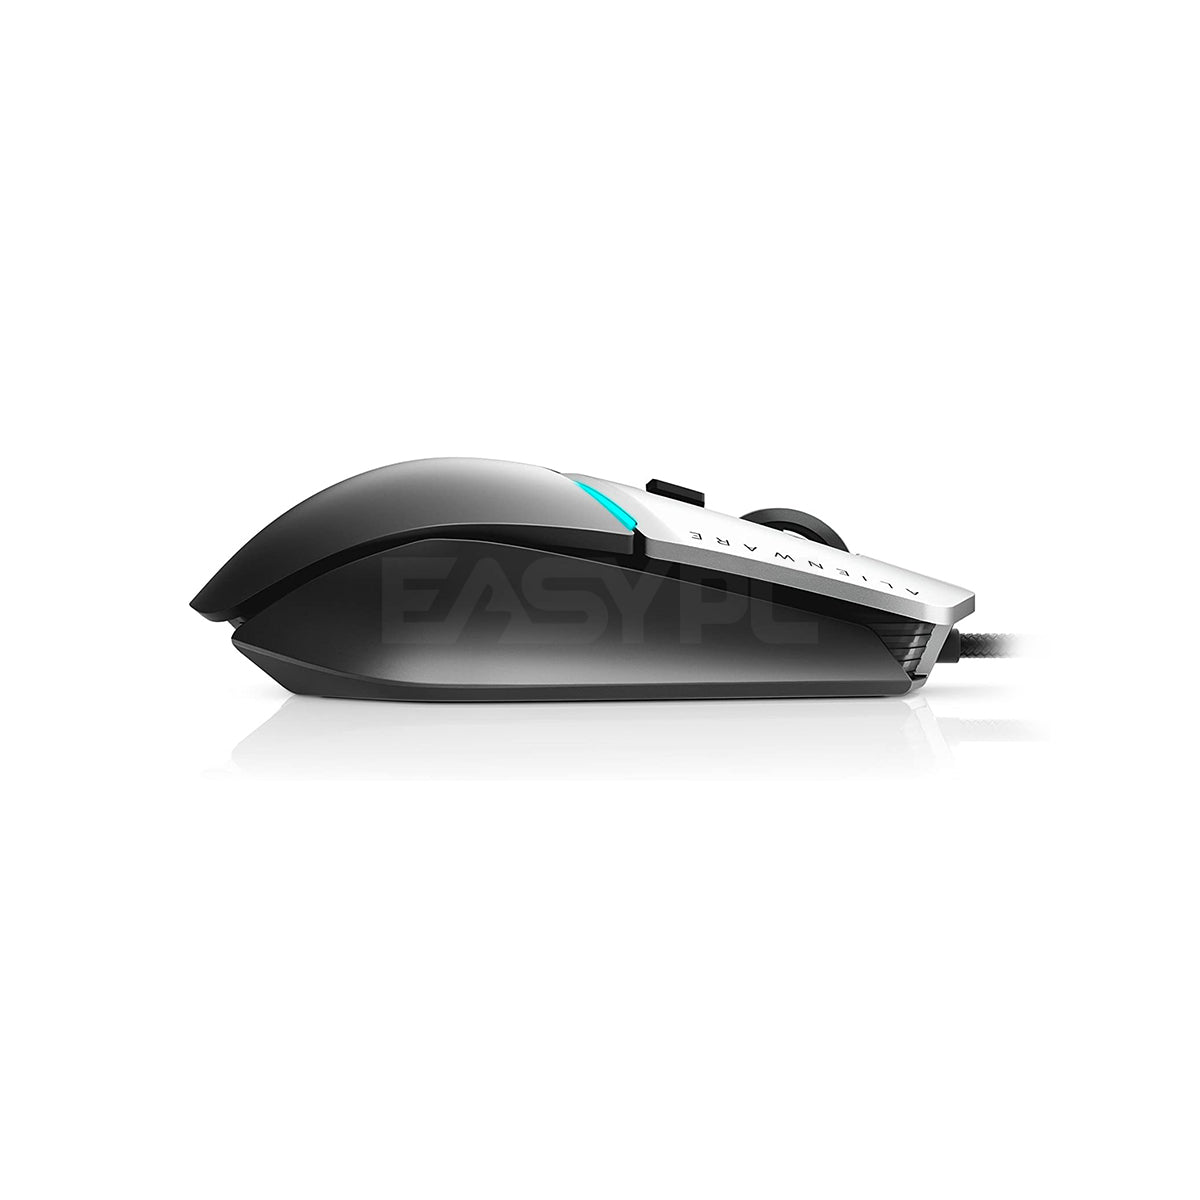 Alienware Elite RGB Gaming Mouse Experience incredible response speed,sensitivity control 100-12000DPI Omron Switch Gaming Mouse AW958 0PHEN ALAW1802